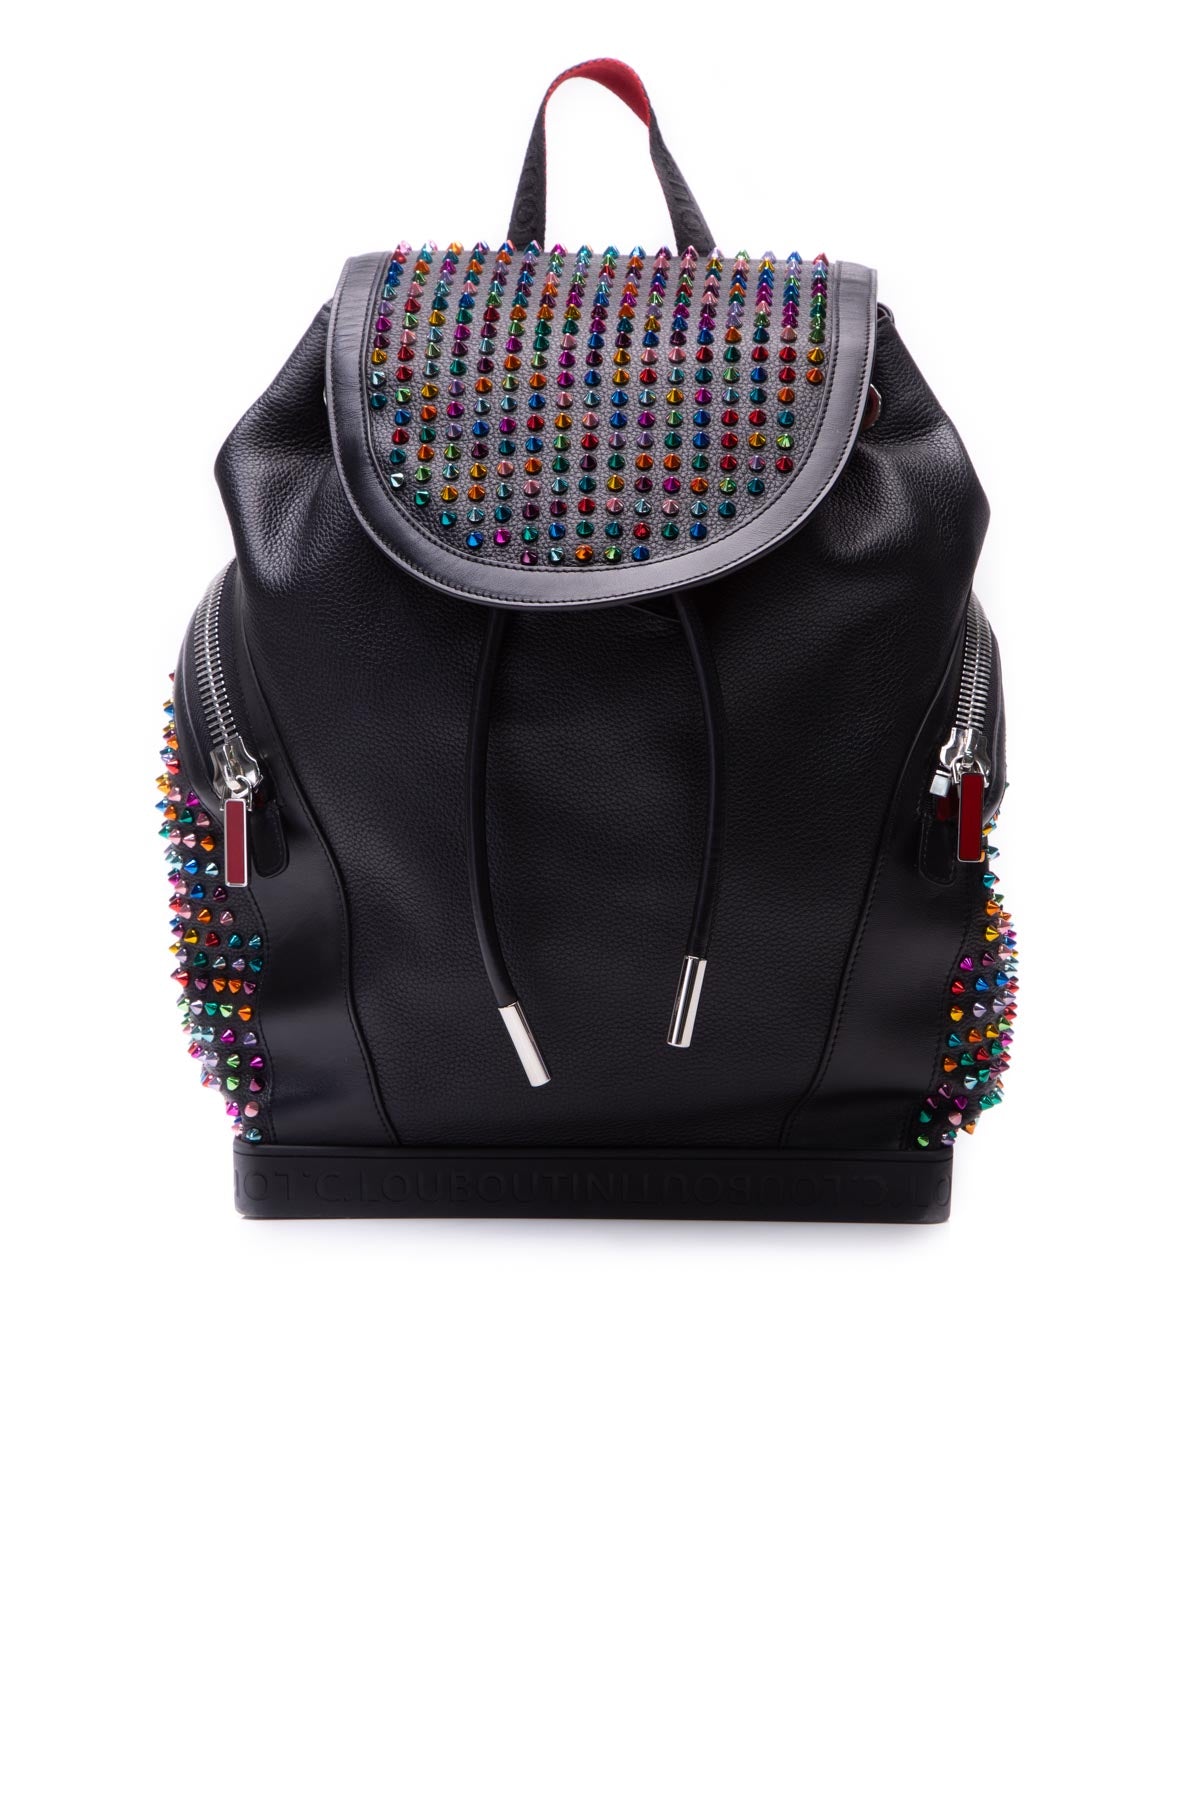 Christian Louboutin Explorafunk Small Empire Spikes Backpack